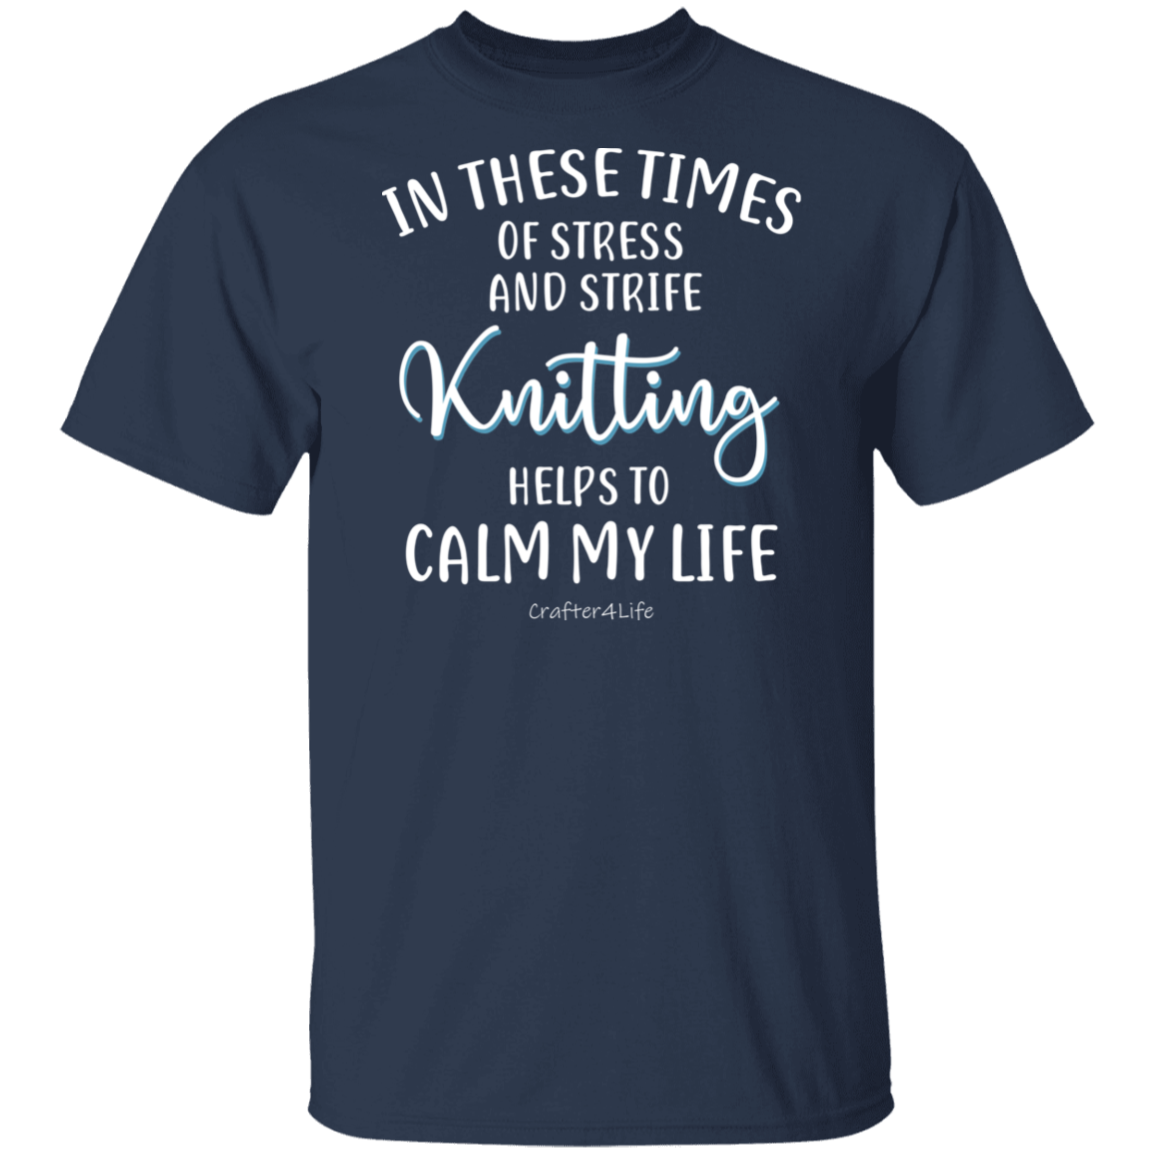 Knitting Helps to Calm My Life T-Shirt